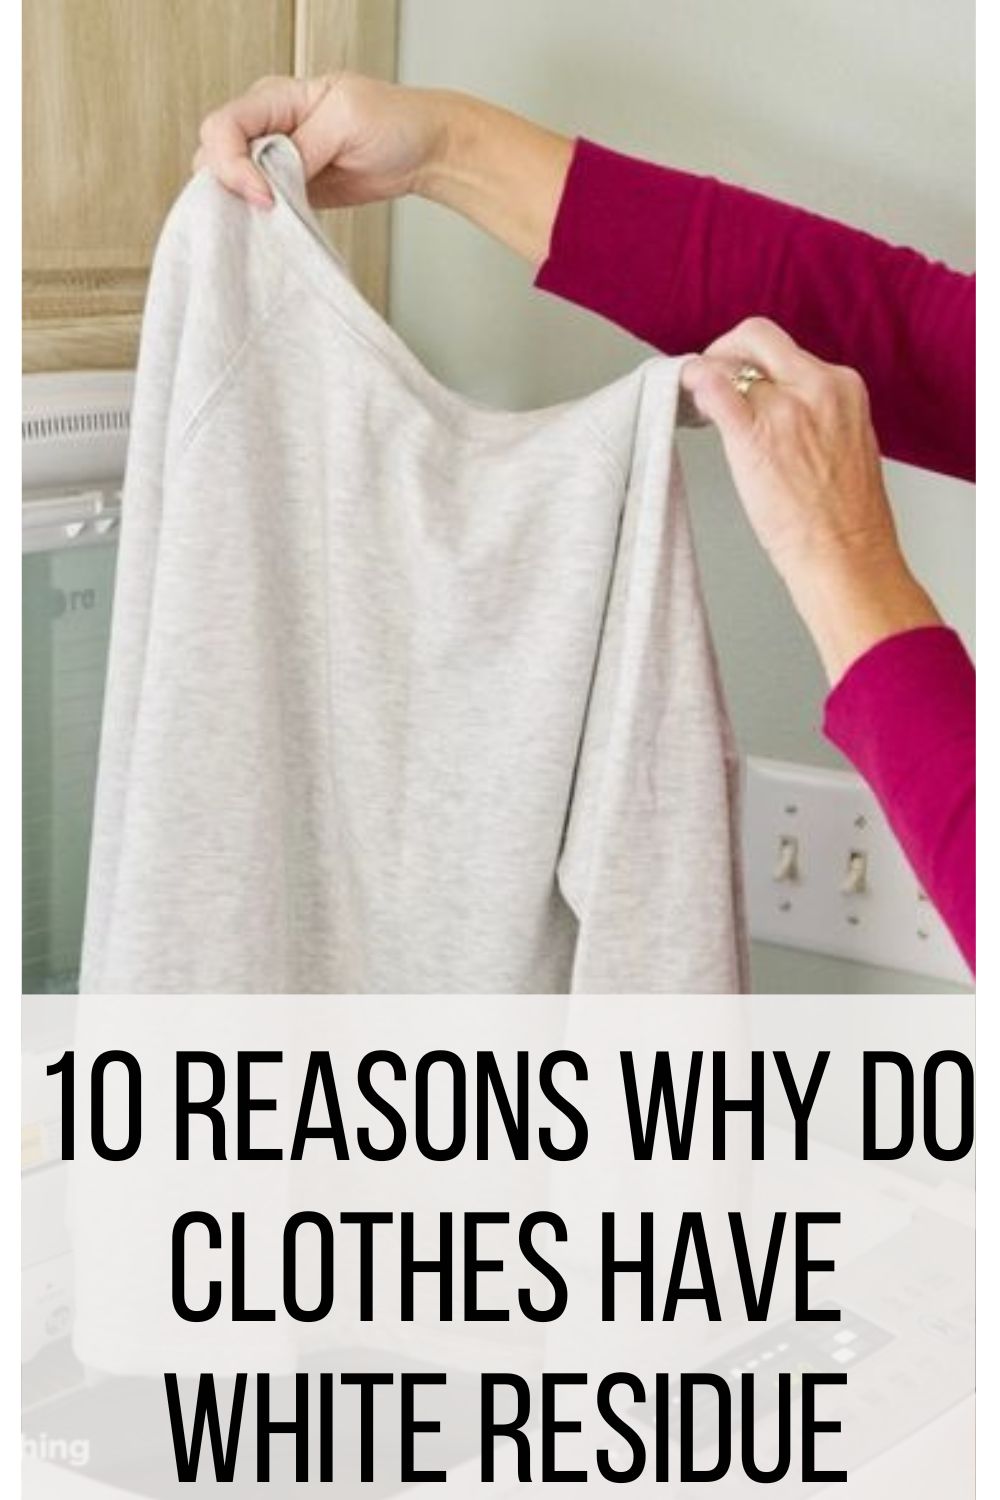 10 Reasons Why Do Clothes have White Residue After Washing